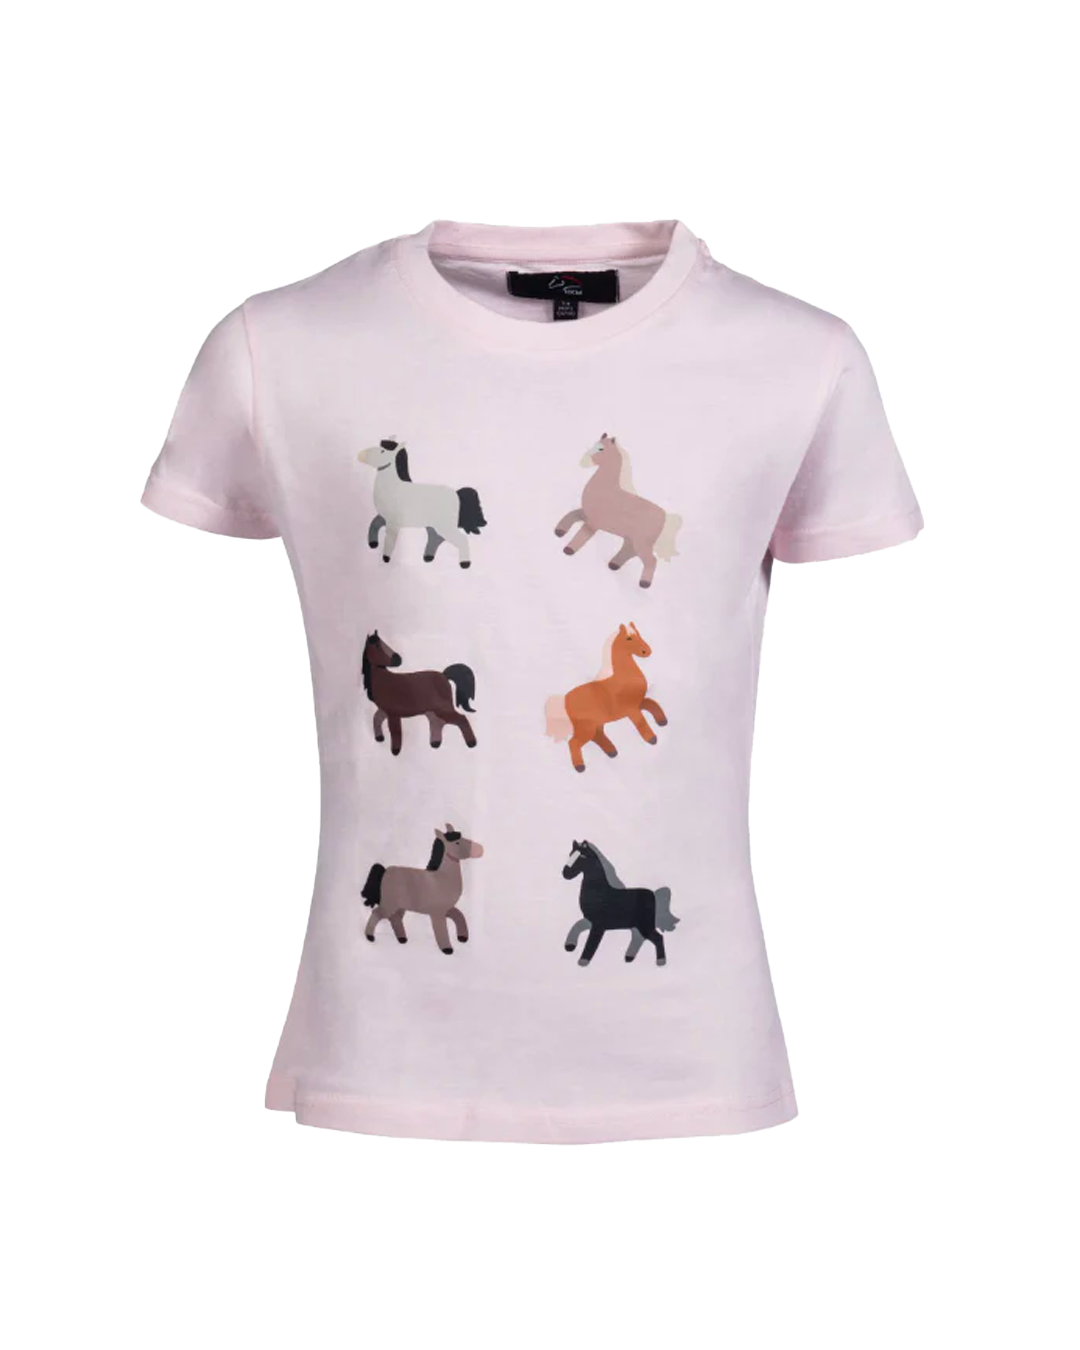 Kids Friendship Tee Shirts & Tops HKM - Equestrian Fashion Outfitters